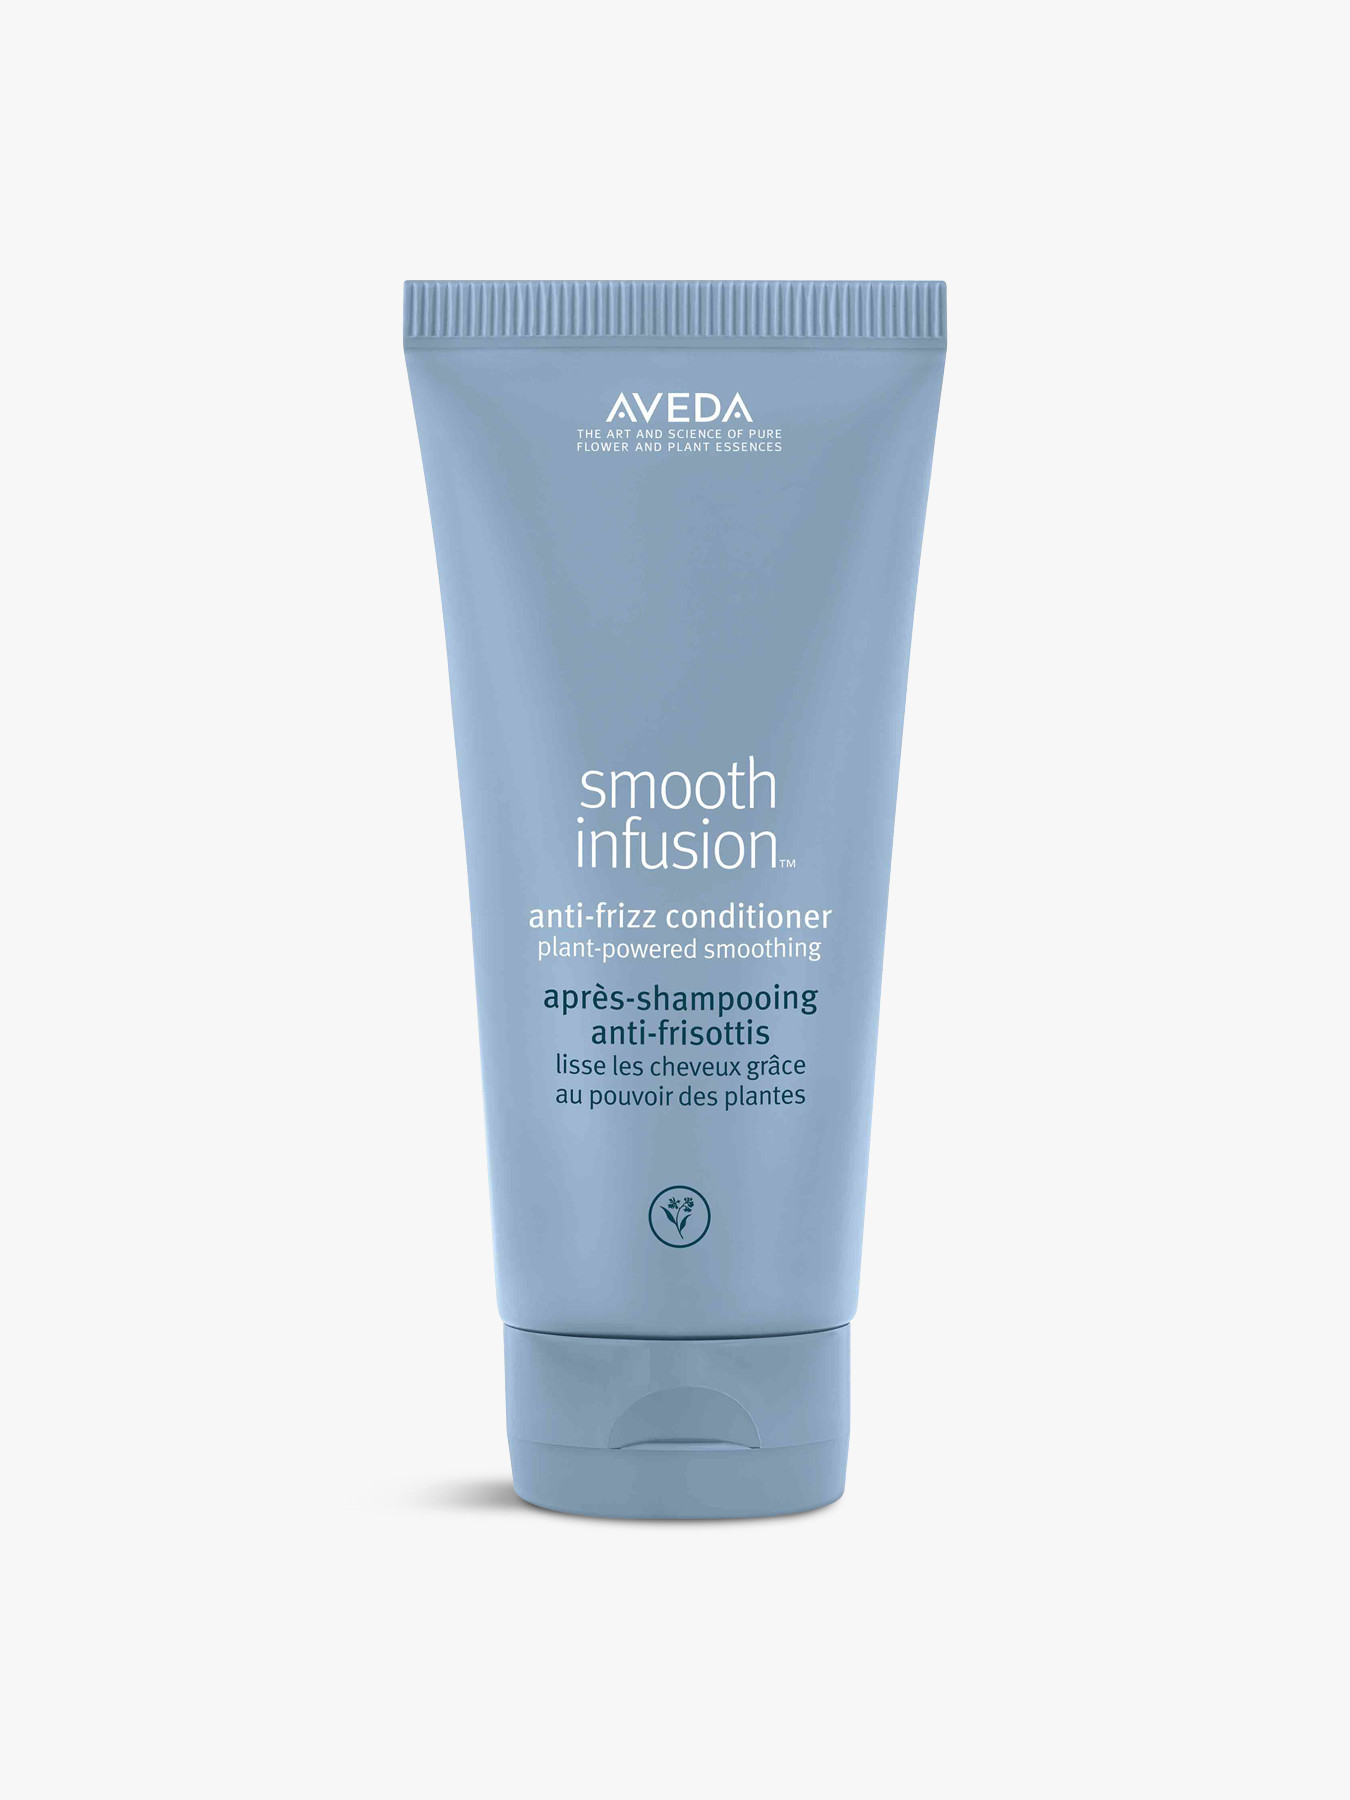 Aveda Smooth Infusion Anti-frizz Conditioner 200ml